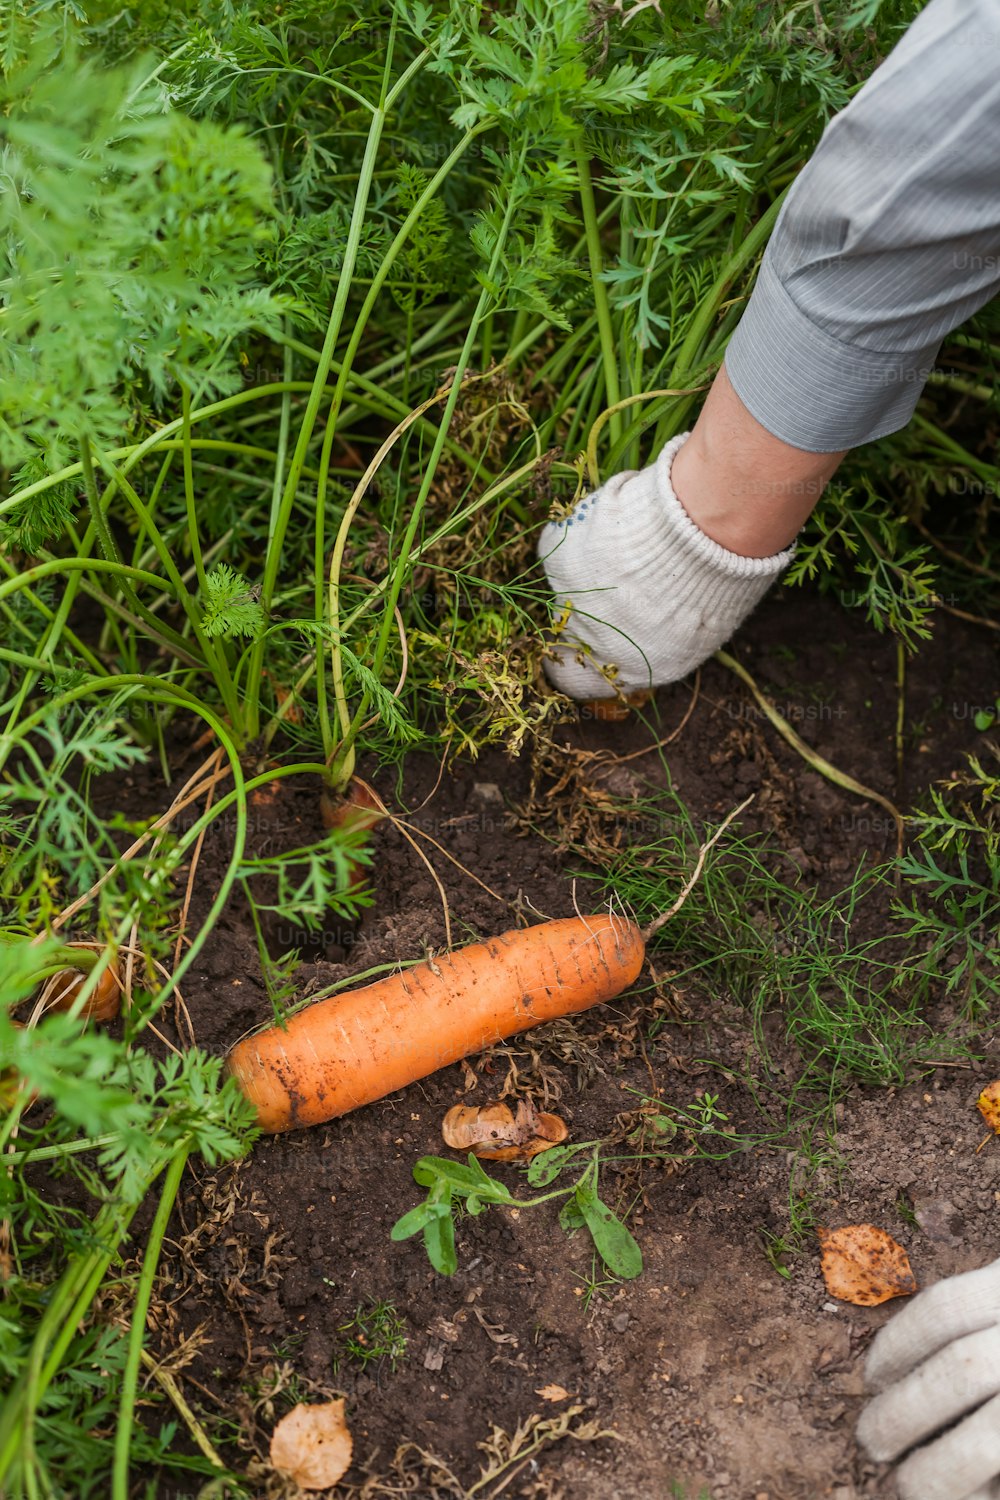 a person is digging in the dirt with a carrot